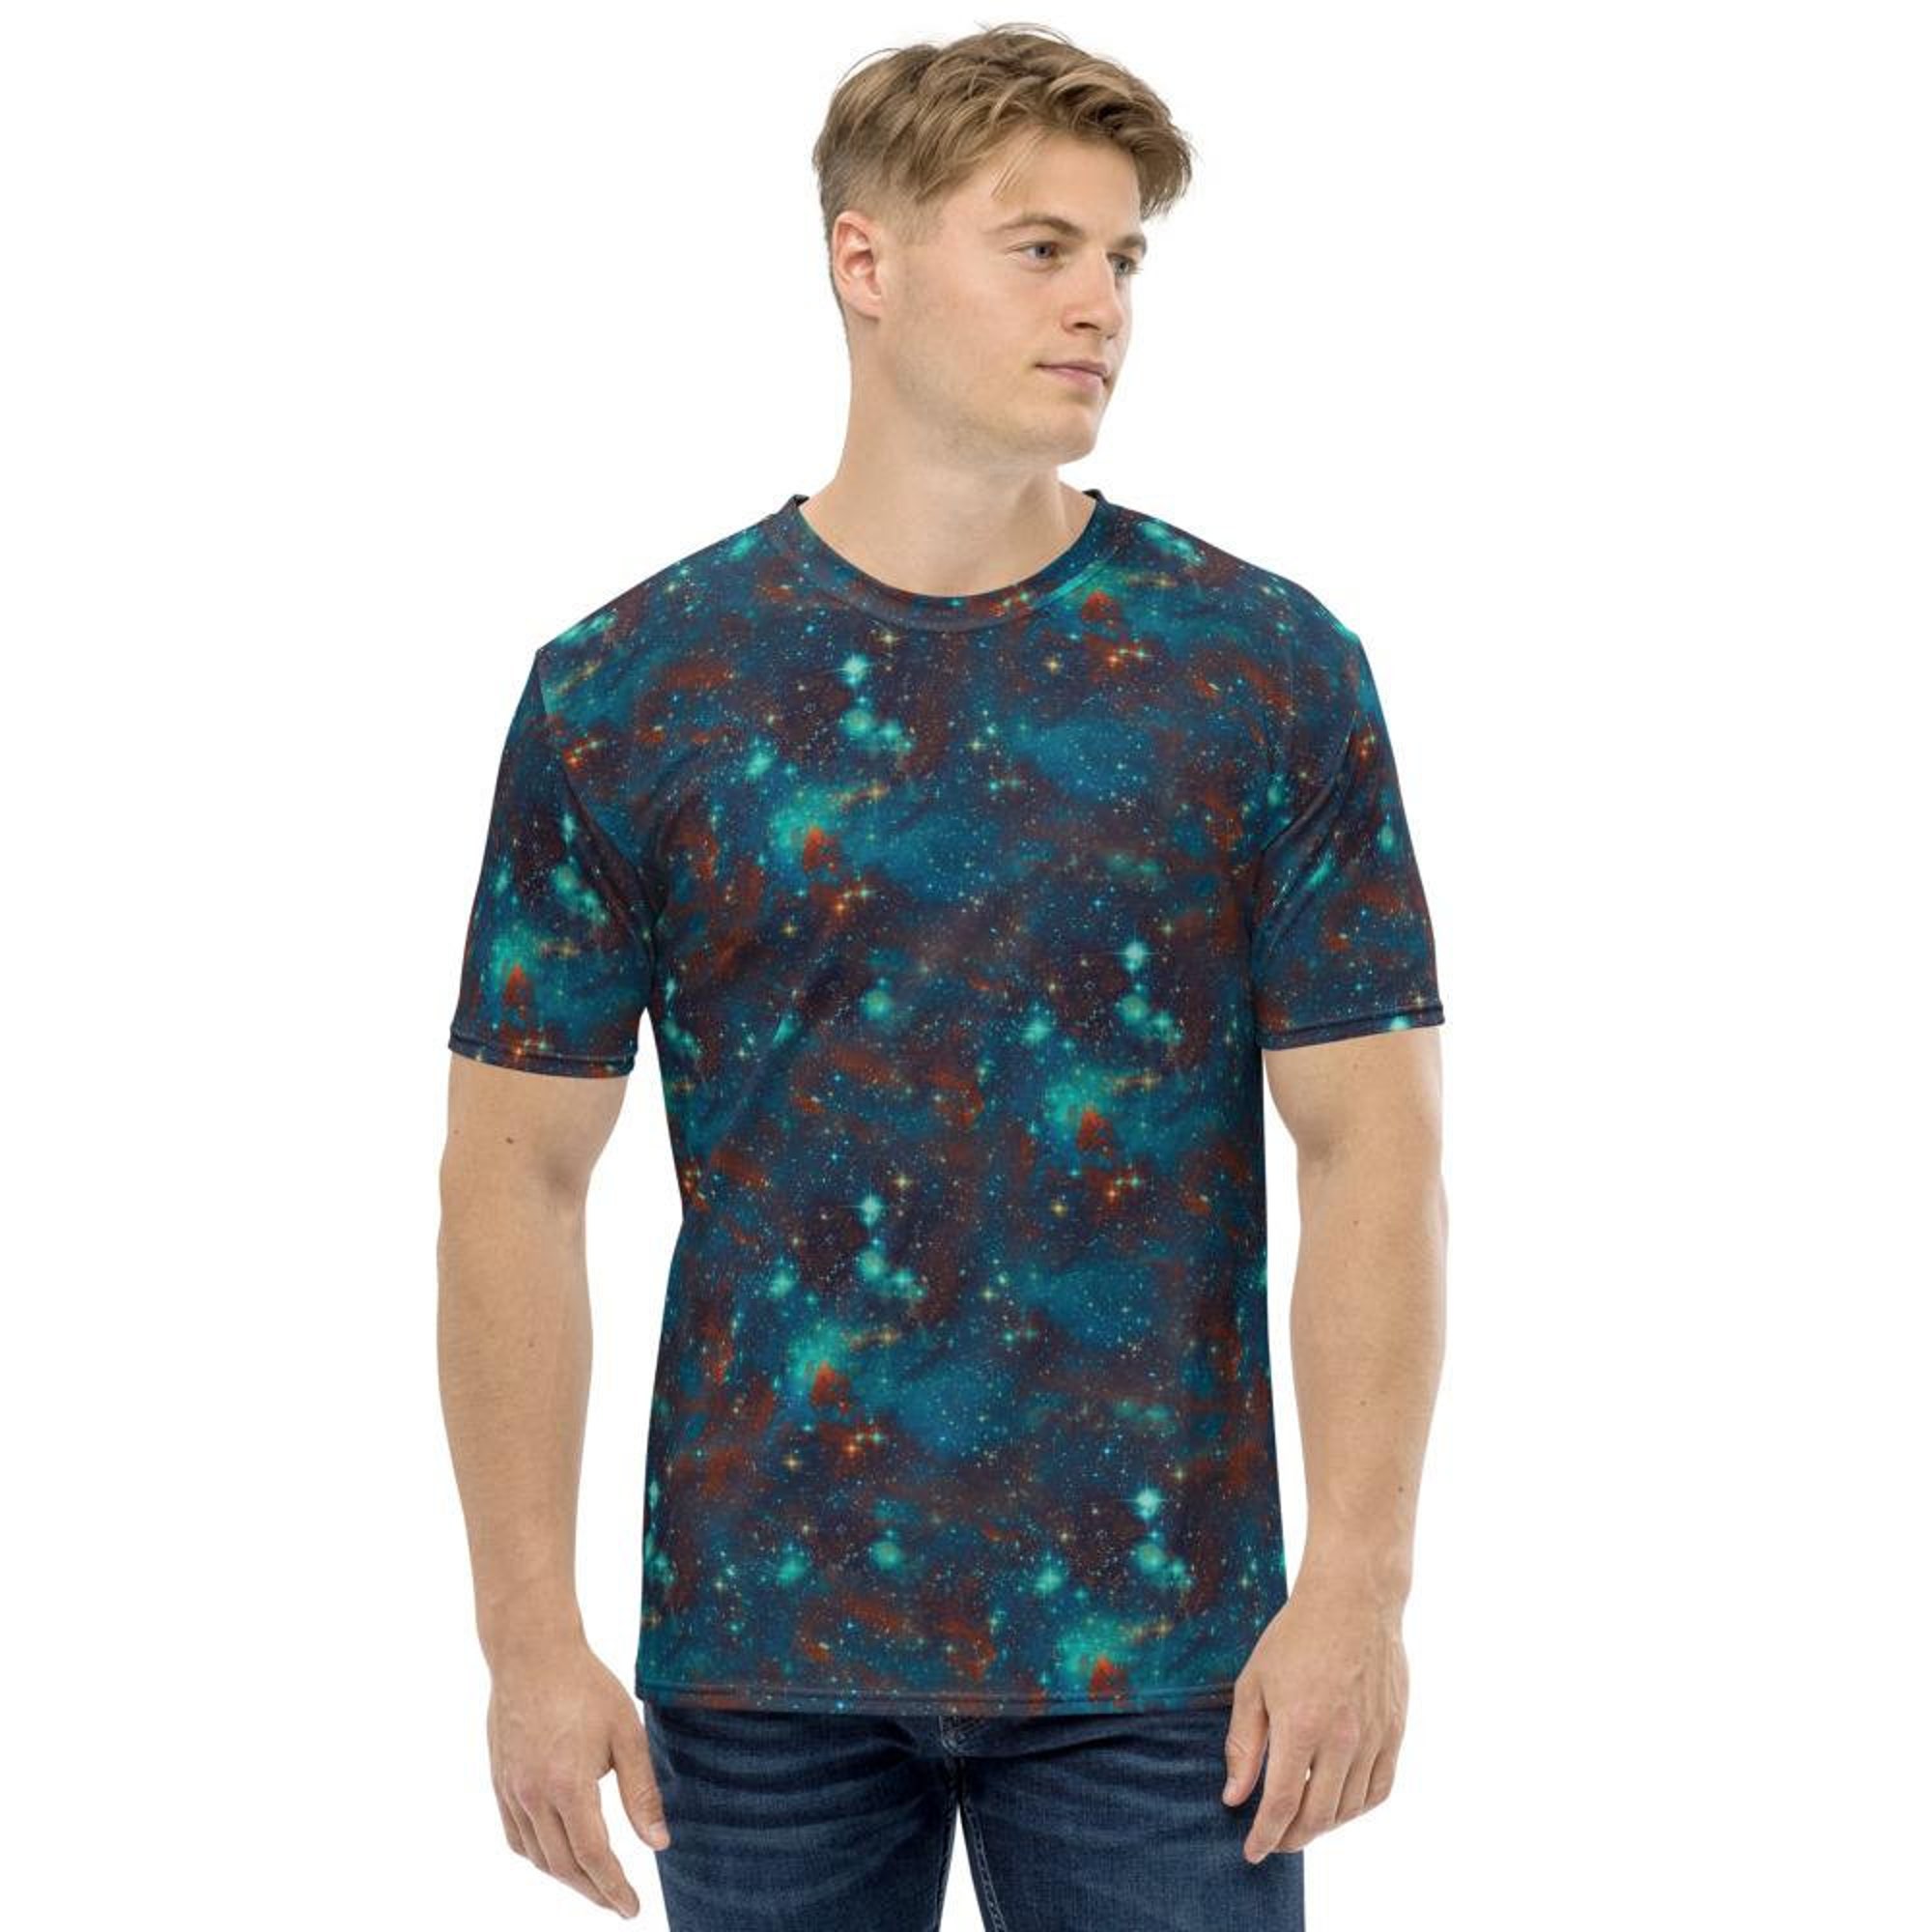 Discover Blue Sky Galaxy Stars Space Abstract Clouds Men's T-shirt